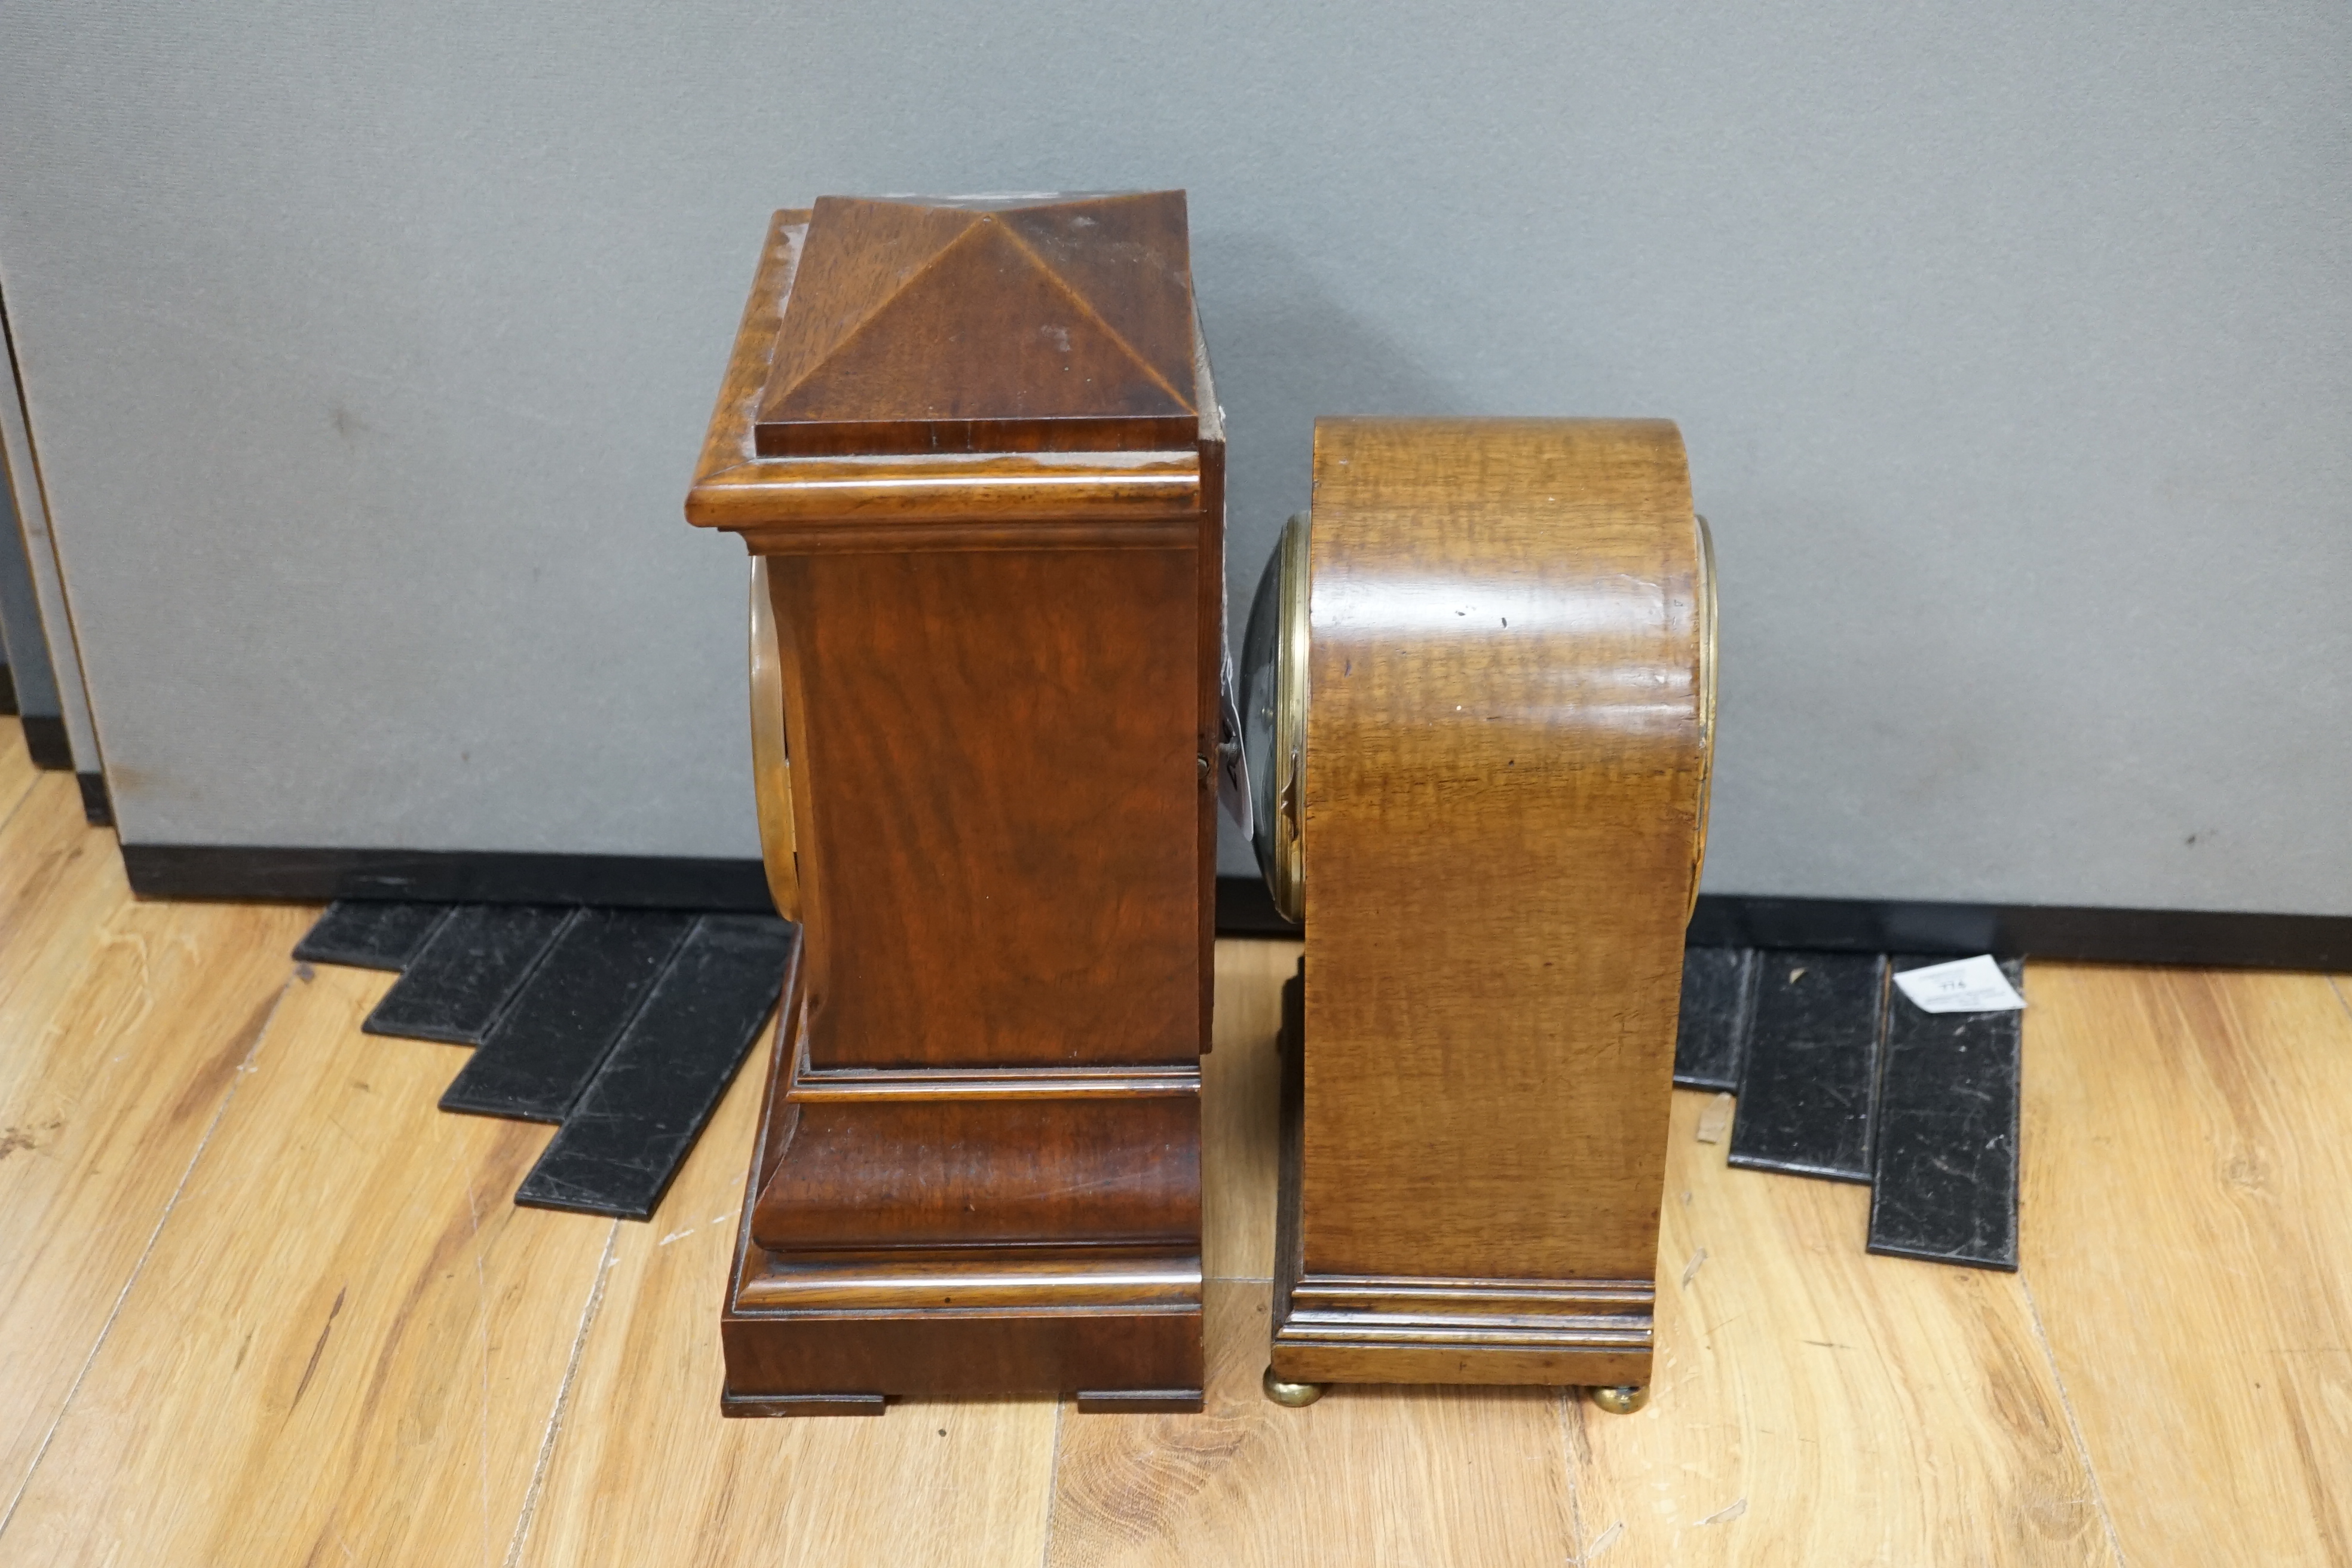 Two early 20th century mantel clocks; a mahogany timepiece and an inlaid Edwardian clock with engine turned face, striking on a coiled gong, tallest 35cm